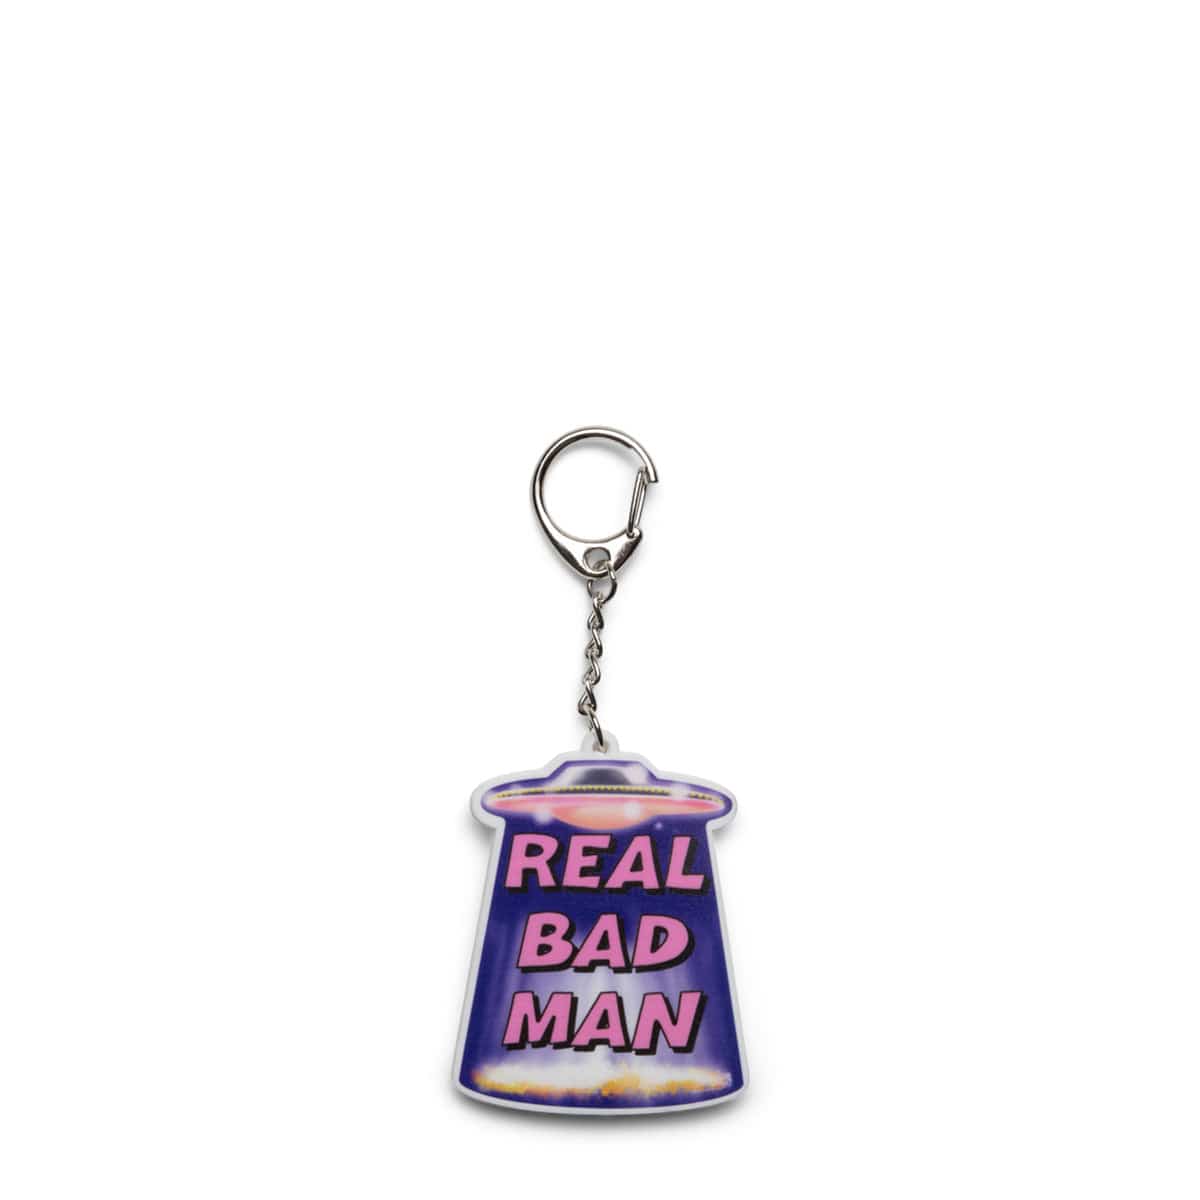 Real Bad Man Accessories - Hard Accessories - Keychains&Toys MULTI / O/S INTERPLANETARY KEY CHAIN